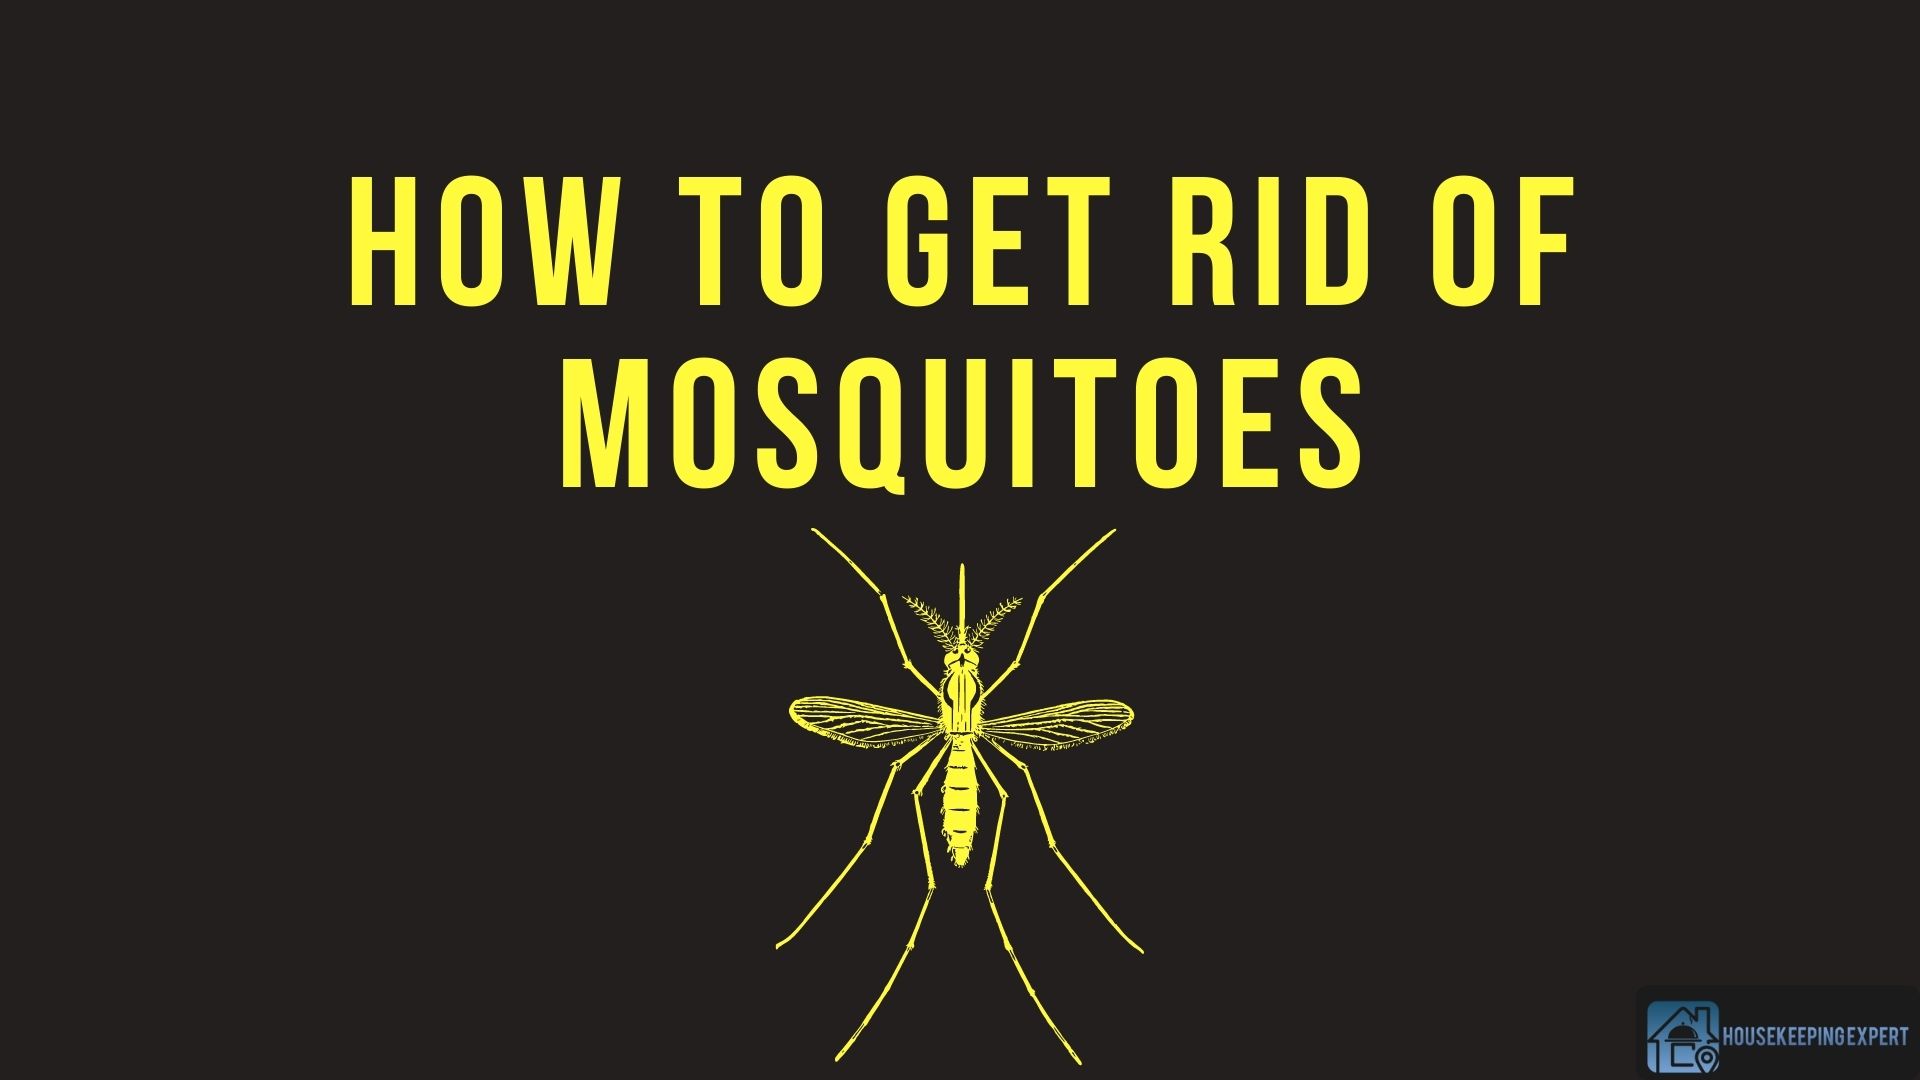 How To Get Rid Of Mosquitoes 14 Effective Ways